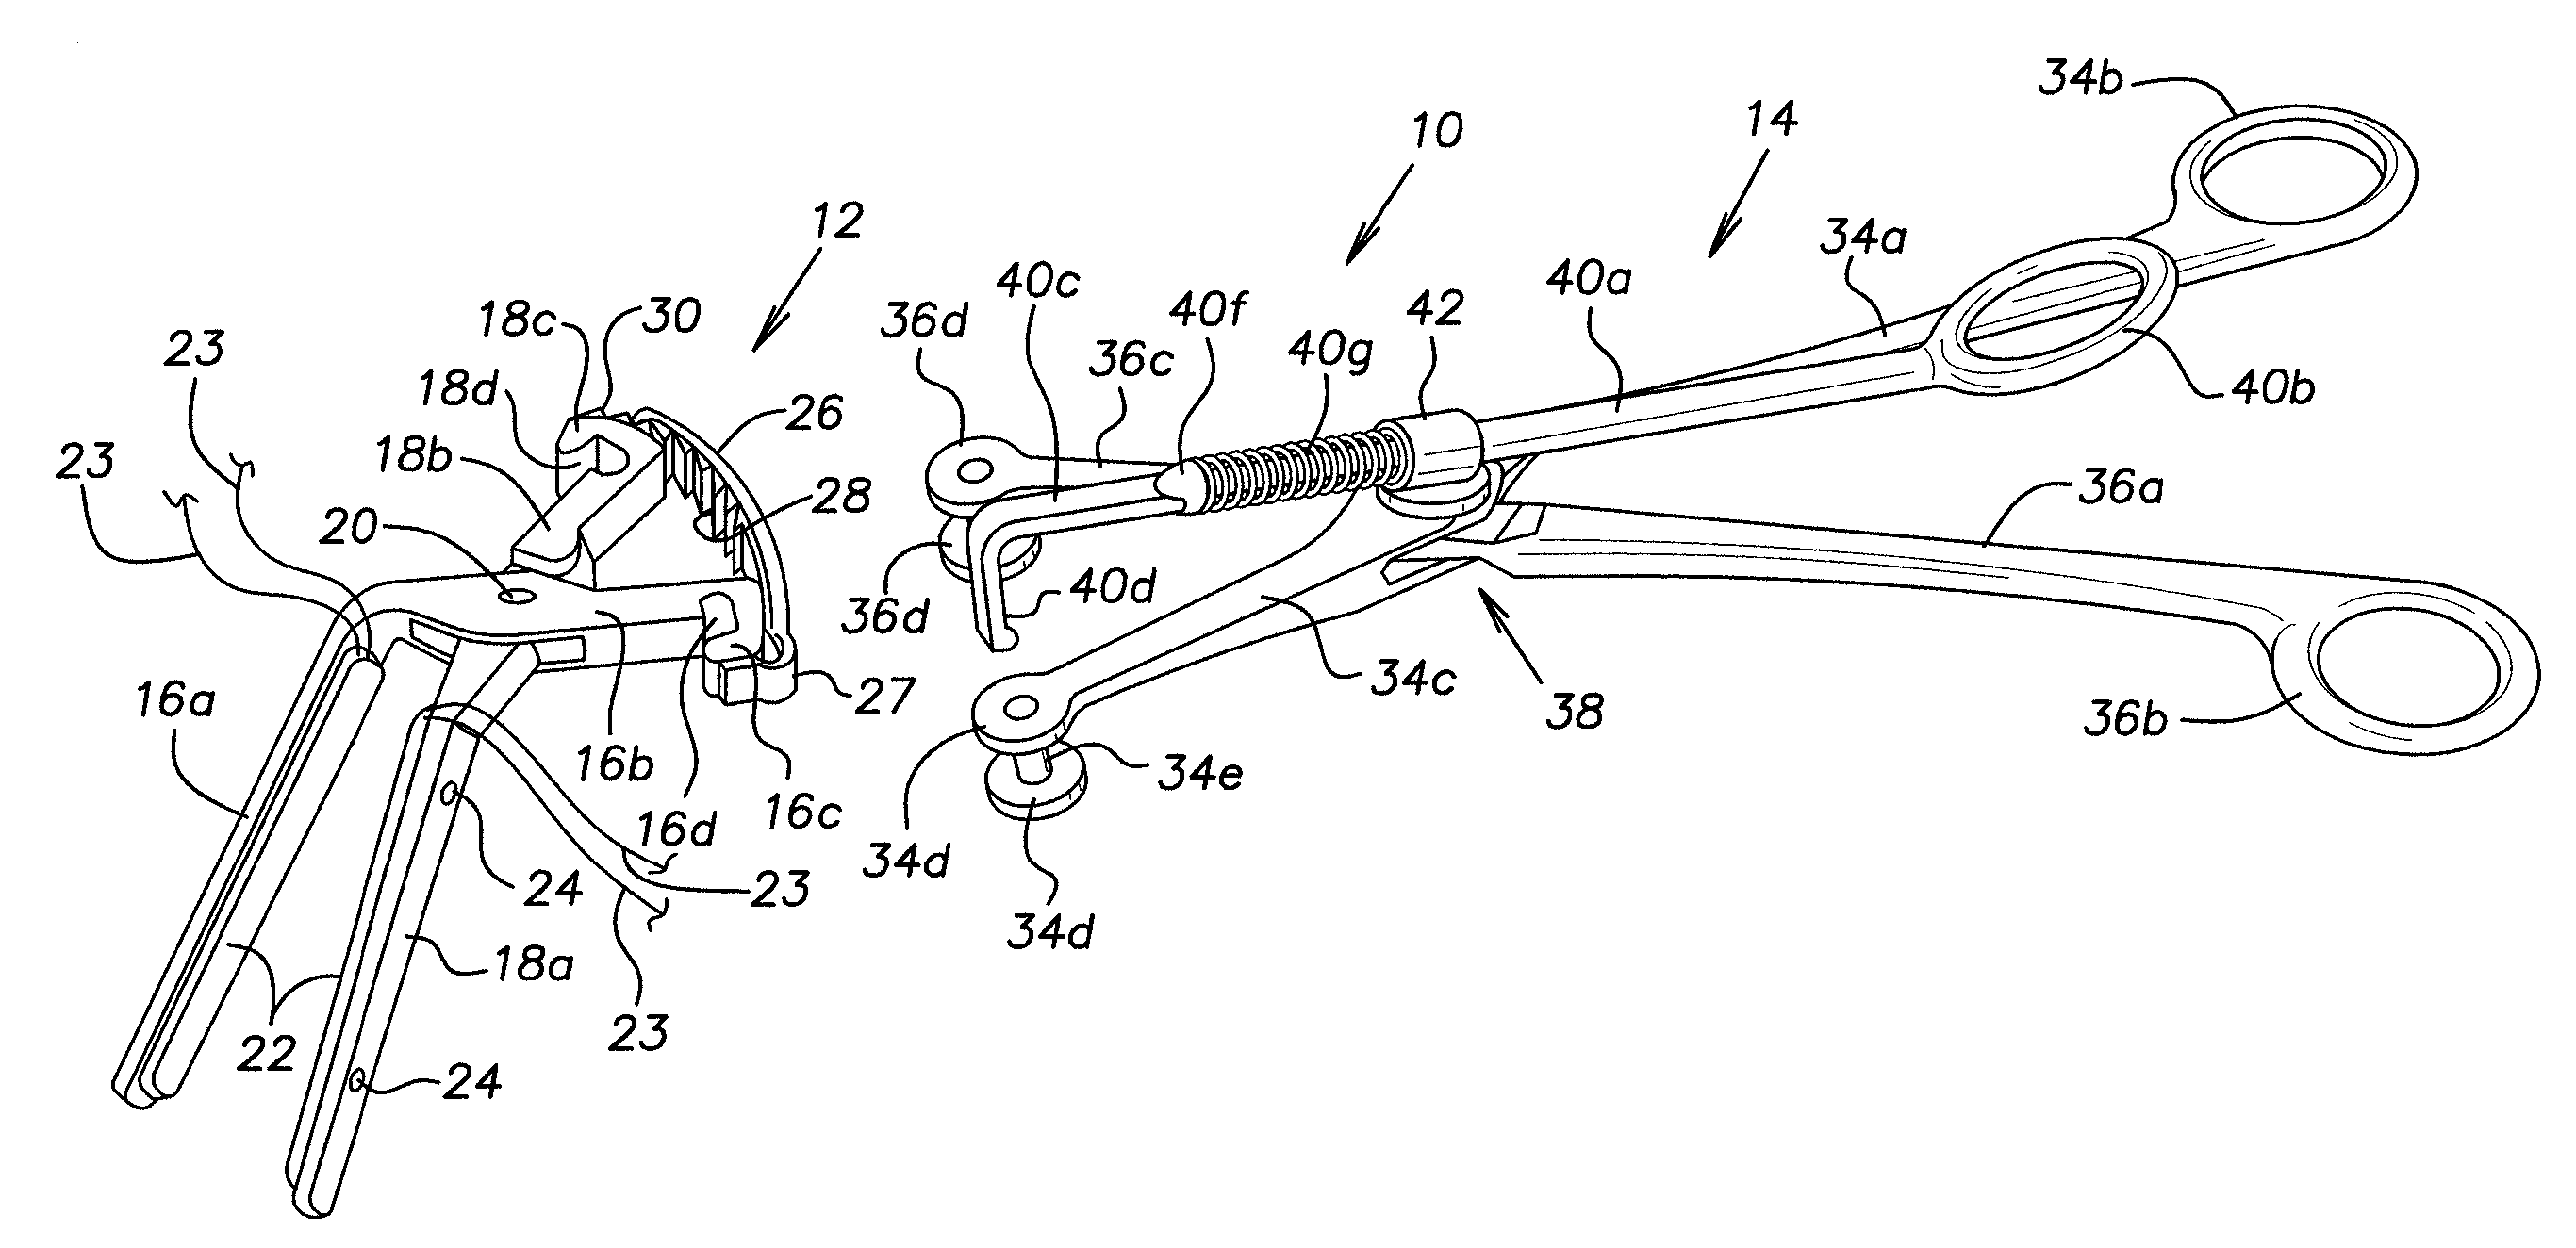 Surgical clamp assembly with electrodes